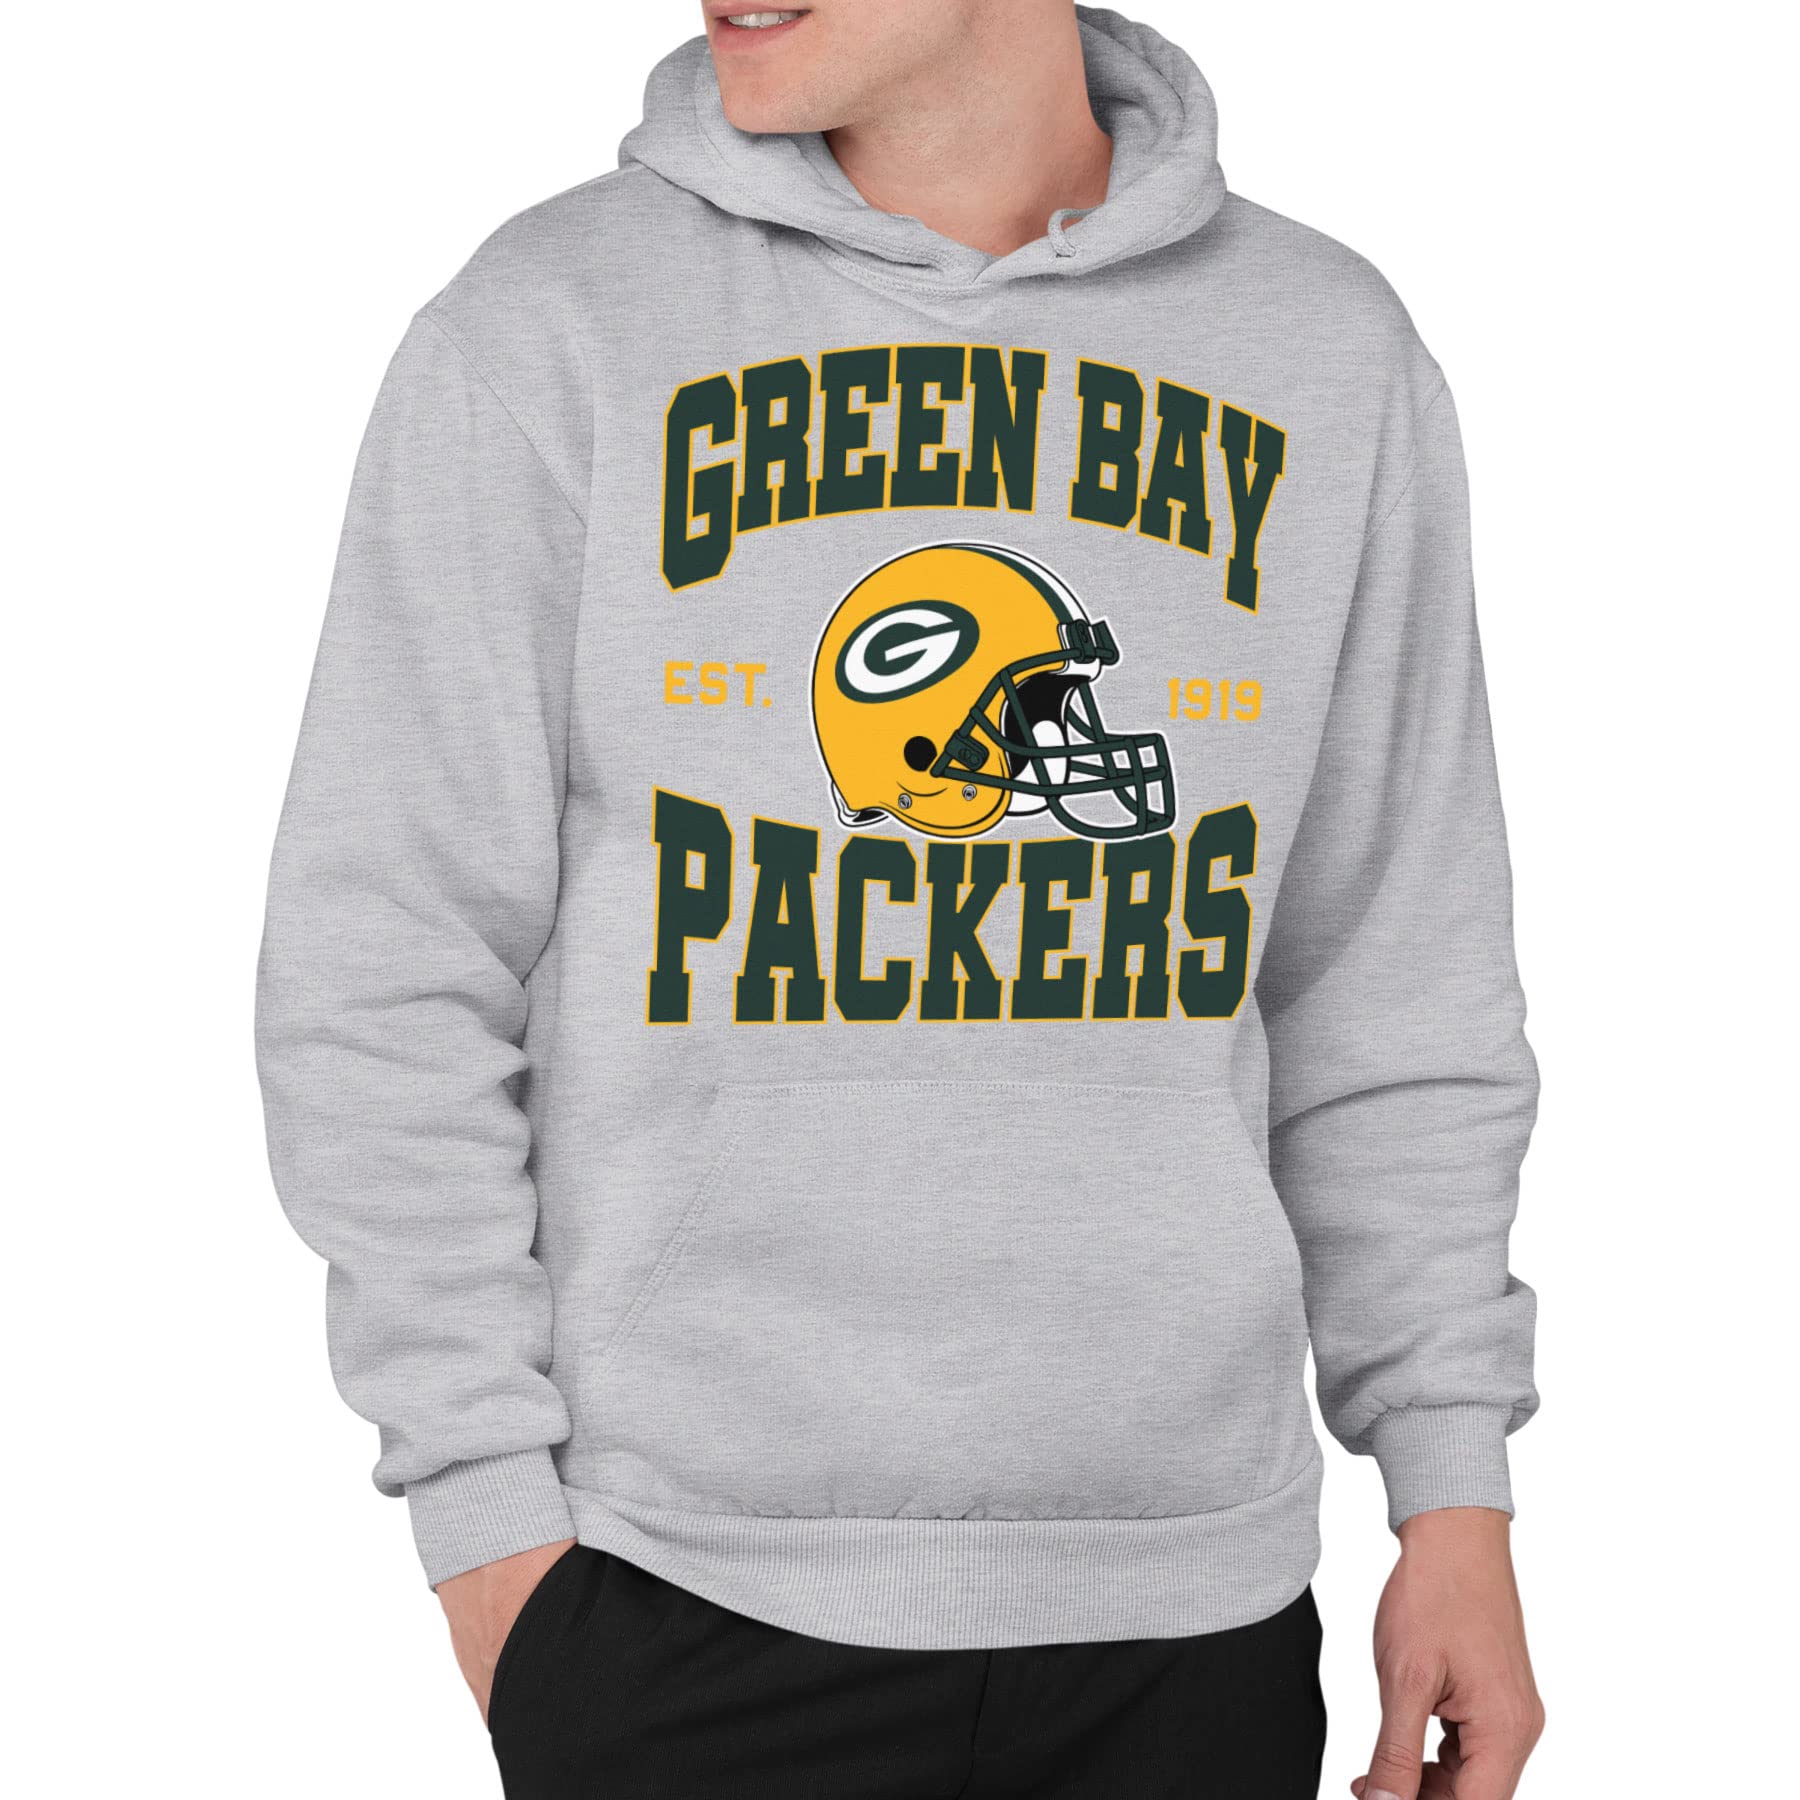 Football Fan Shop Officially Licensed NFL Short Sleeve Crew Neck - Packers - White